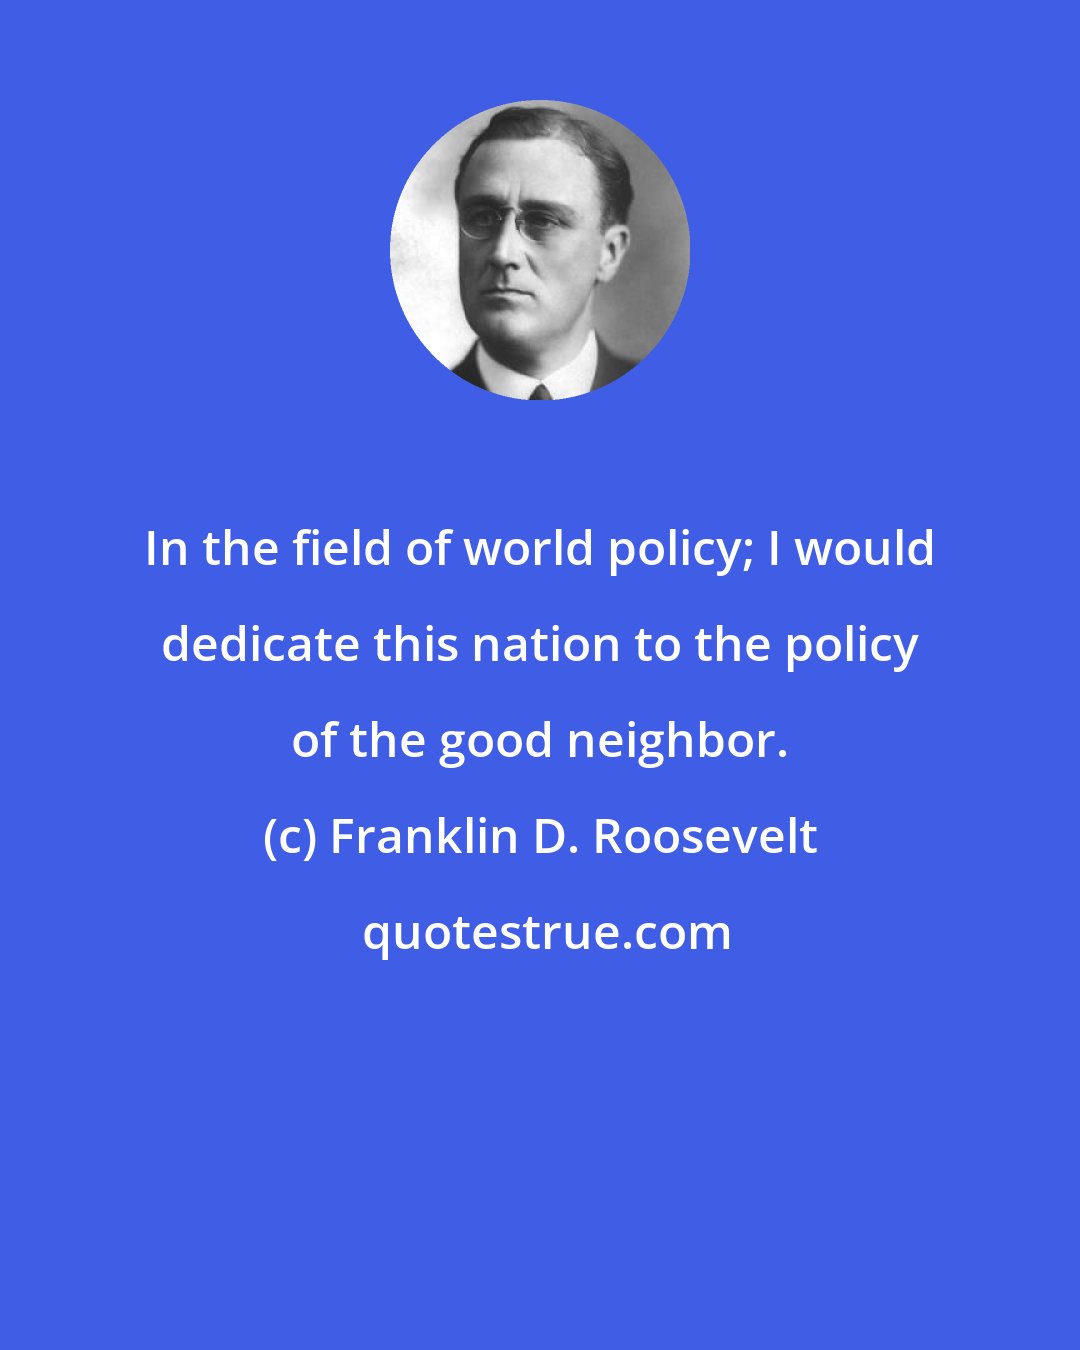 Franklin D. Roosevelt: In the field of world policy; I would dedicate this nation to the policy of the good neighbor.